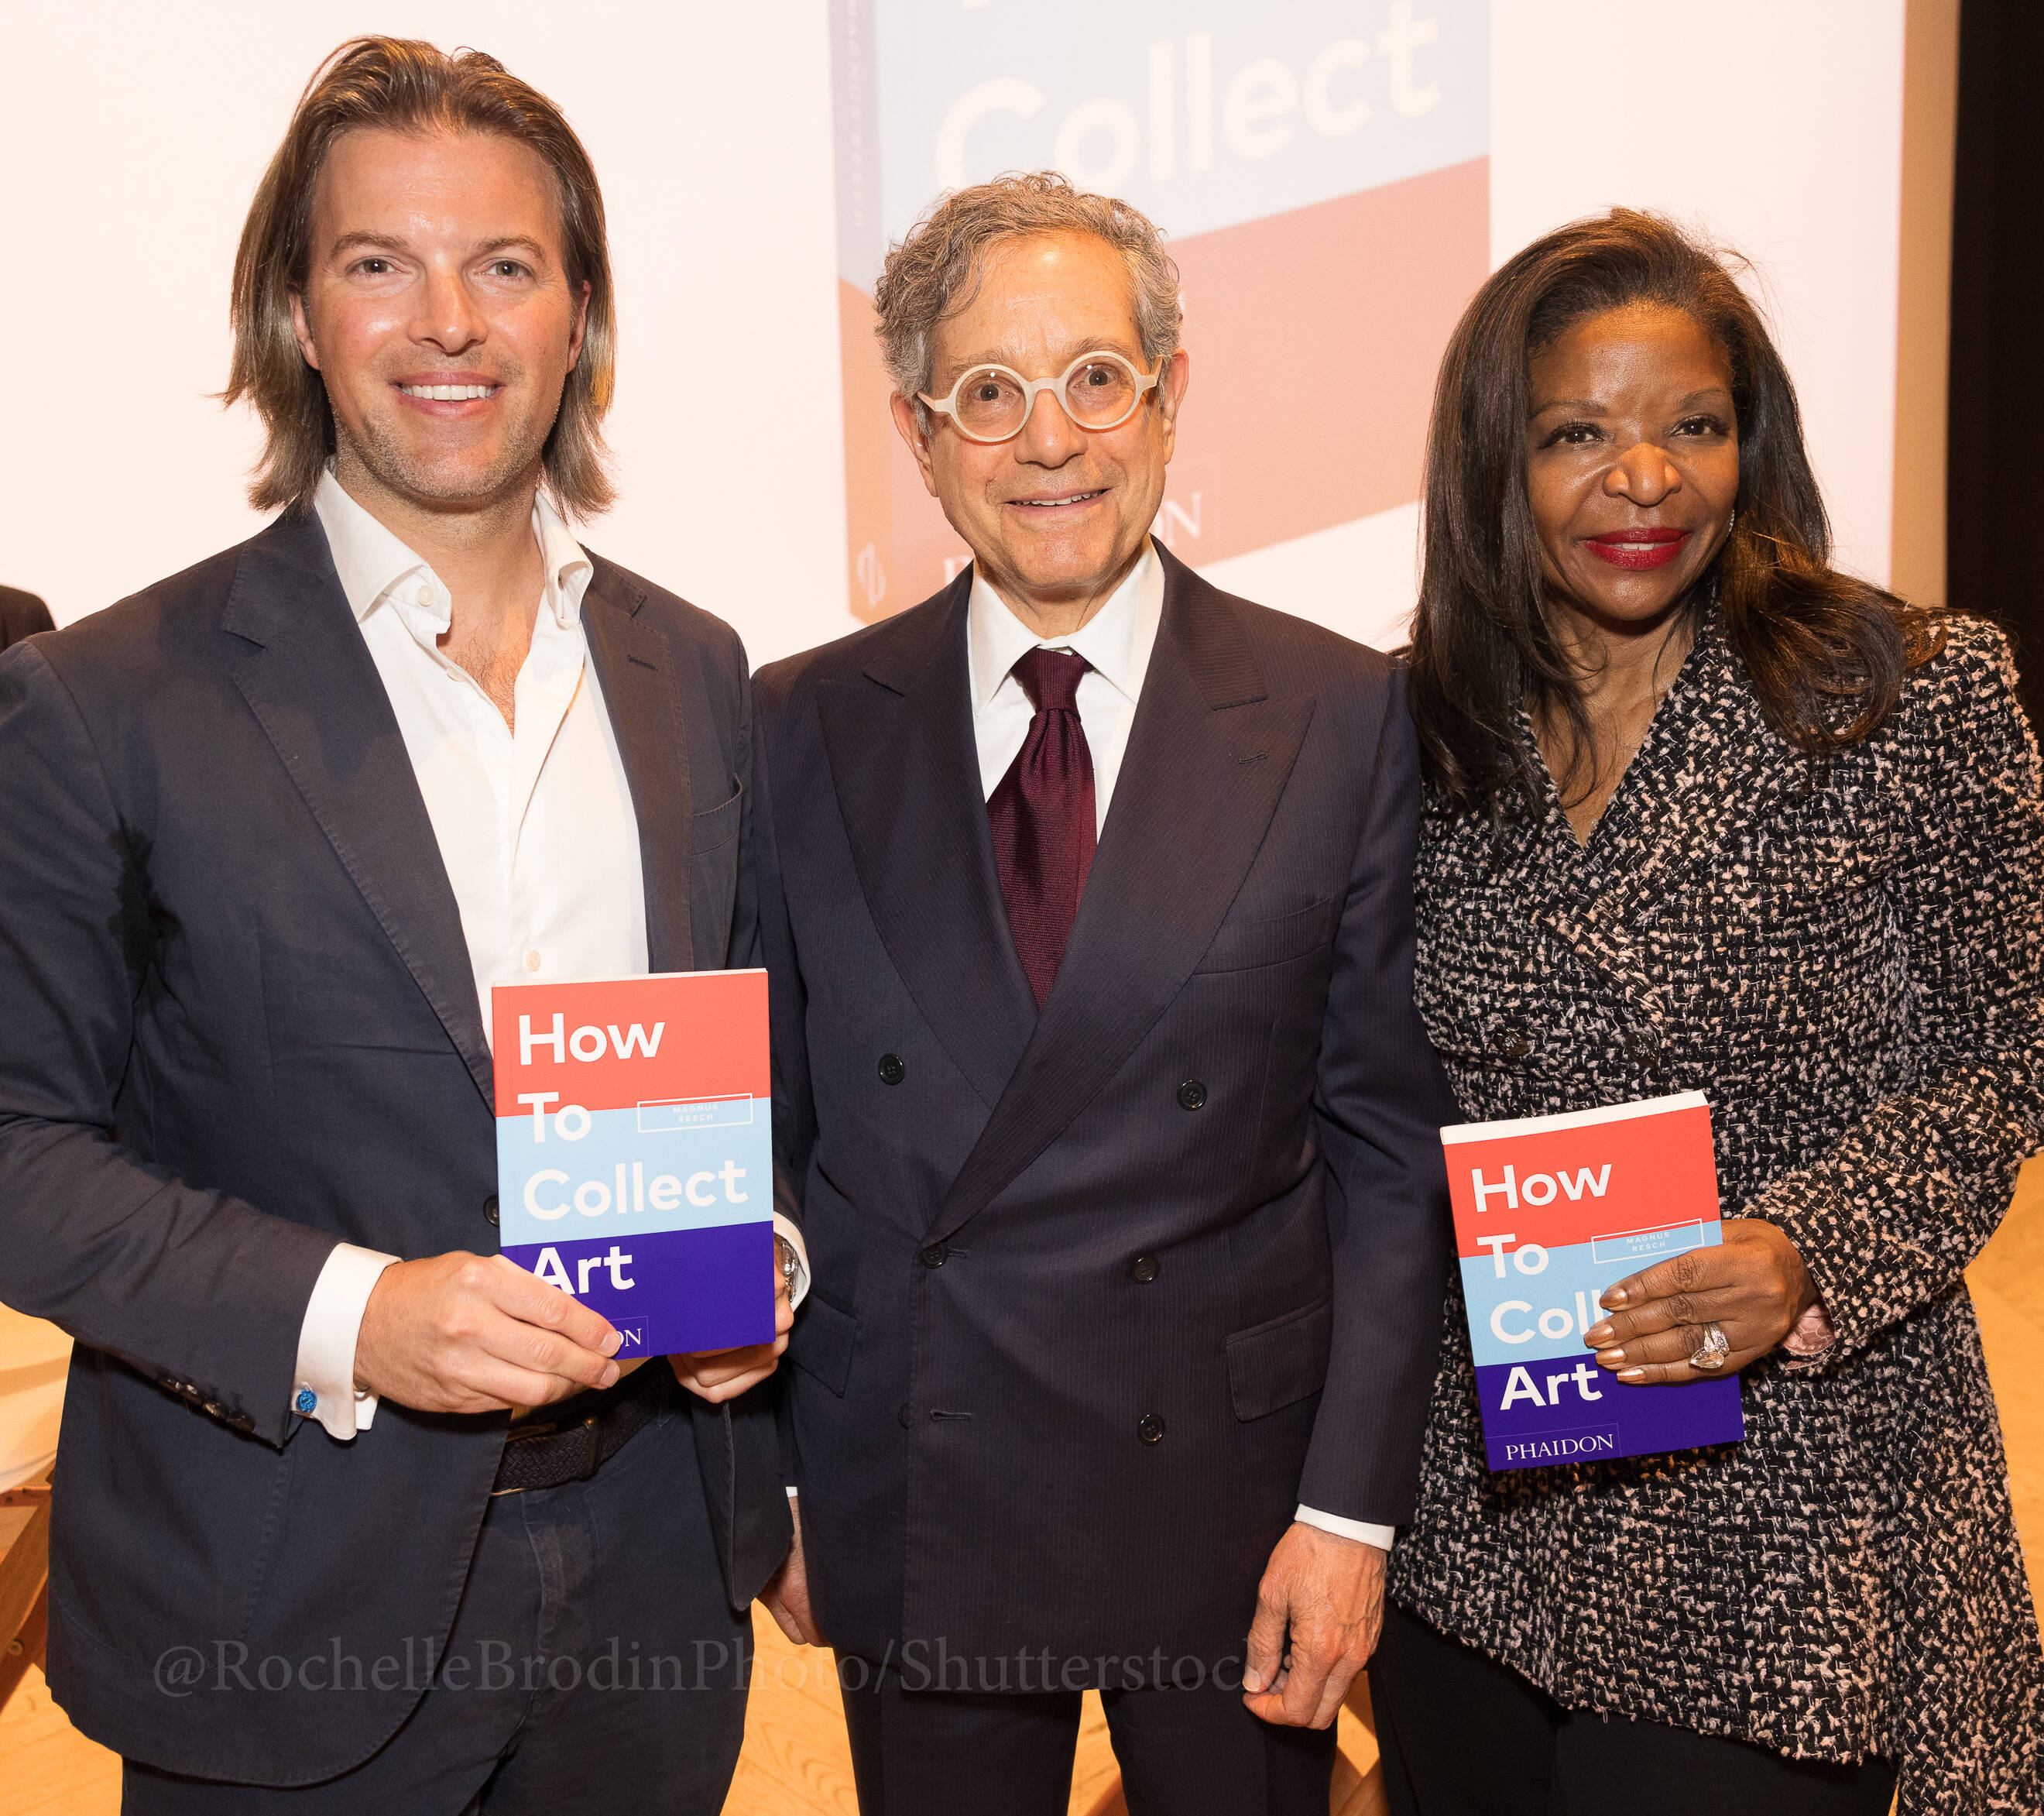 Phaidon authors introduced their books at events in the US and Europe